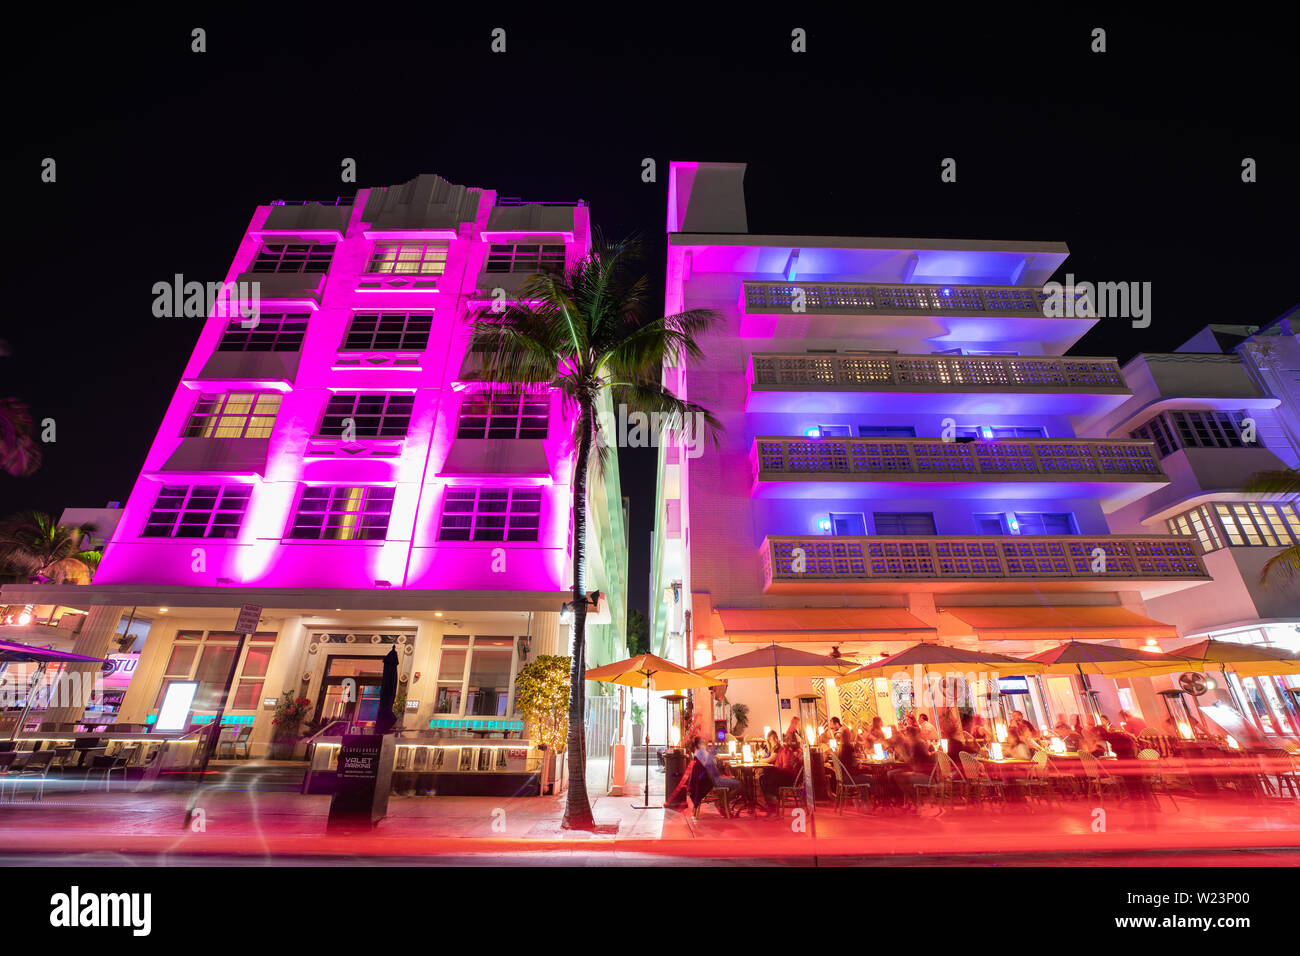 Night view of Street Ocean Drive, Art Deco Building and Hotels. Stock Photo